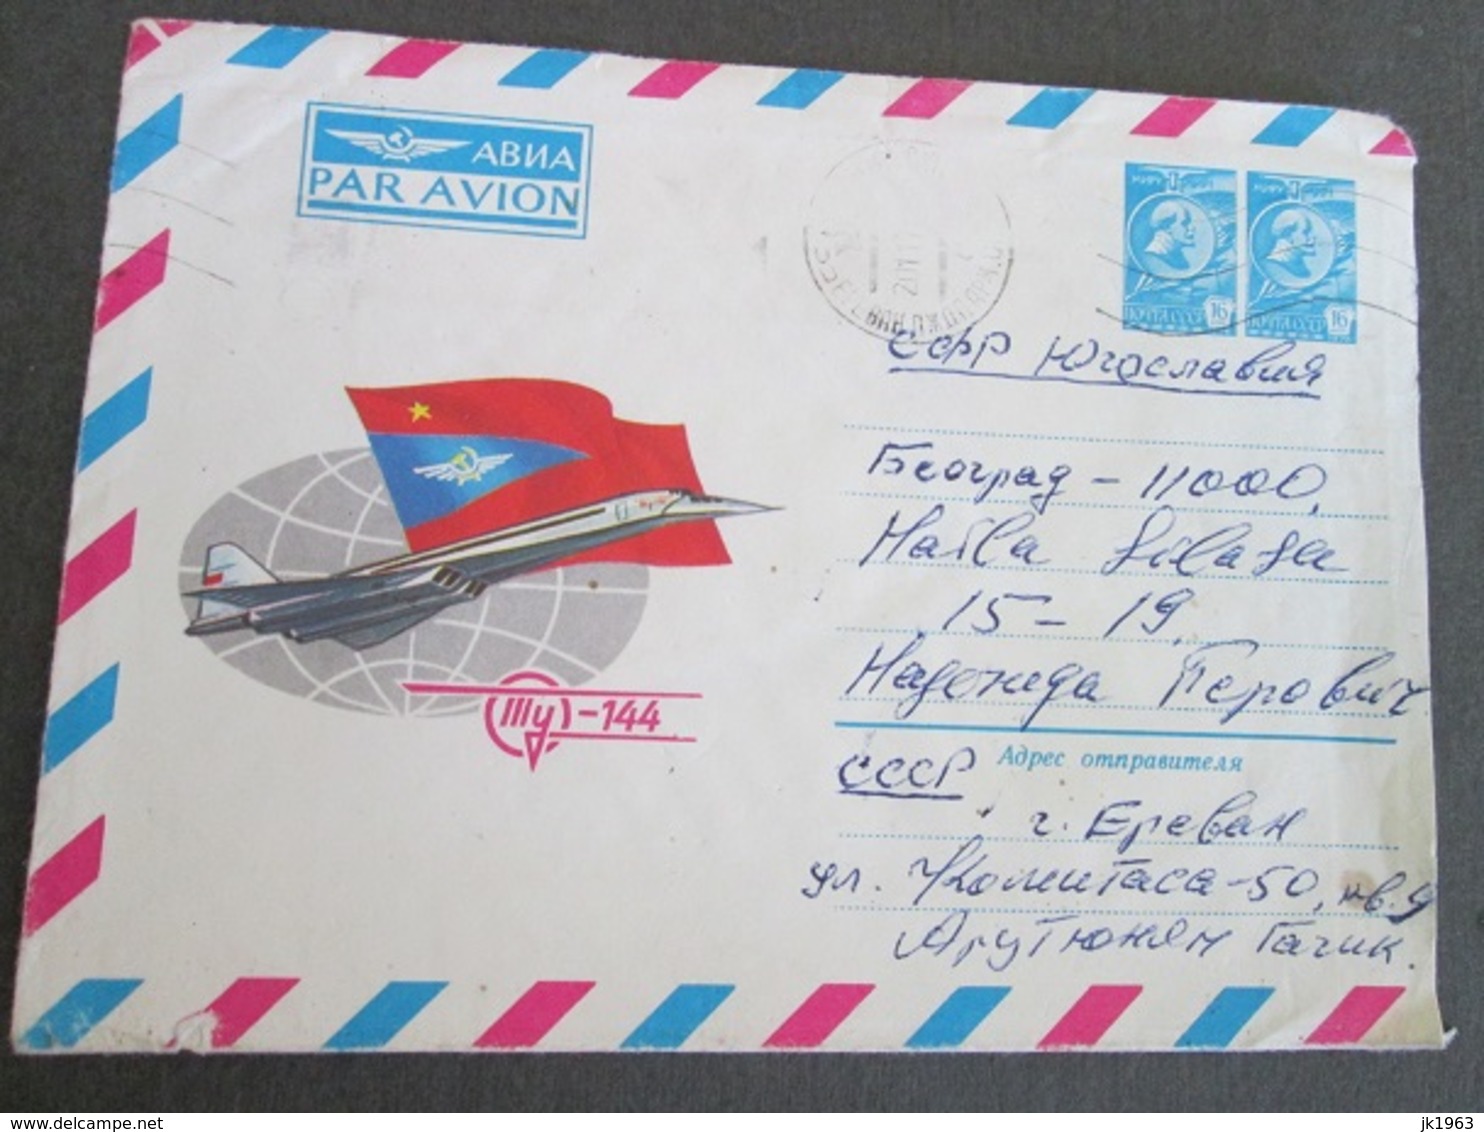 RUSSIA, EIGHT AIRMAIL COVERS, STAMPS PLANE, POSTAL STATIONERY, TU-144, POLAR STATION, IL-62